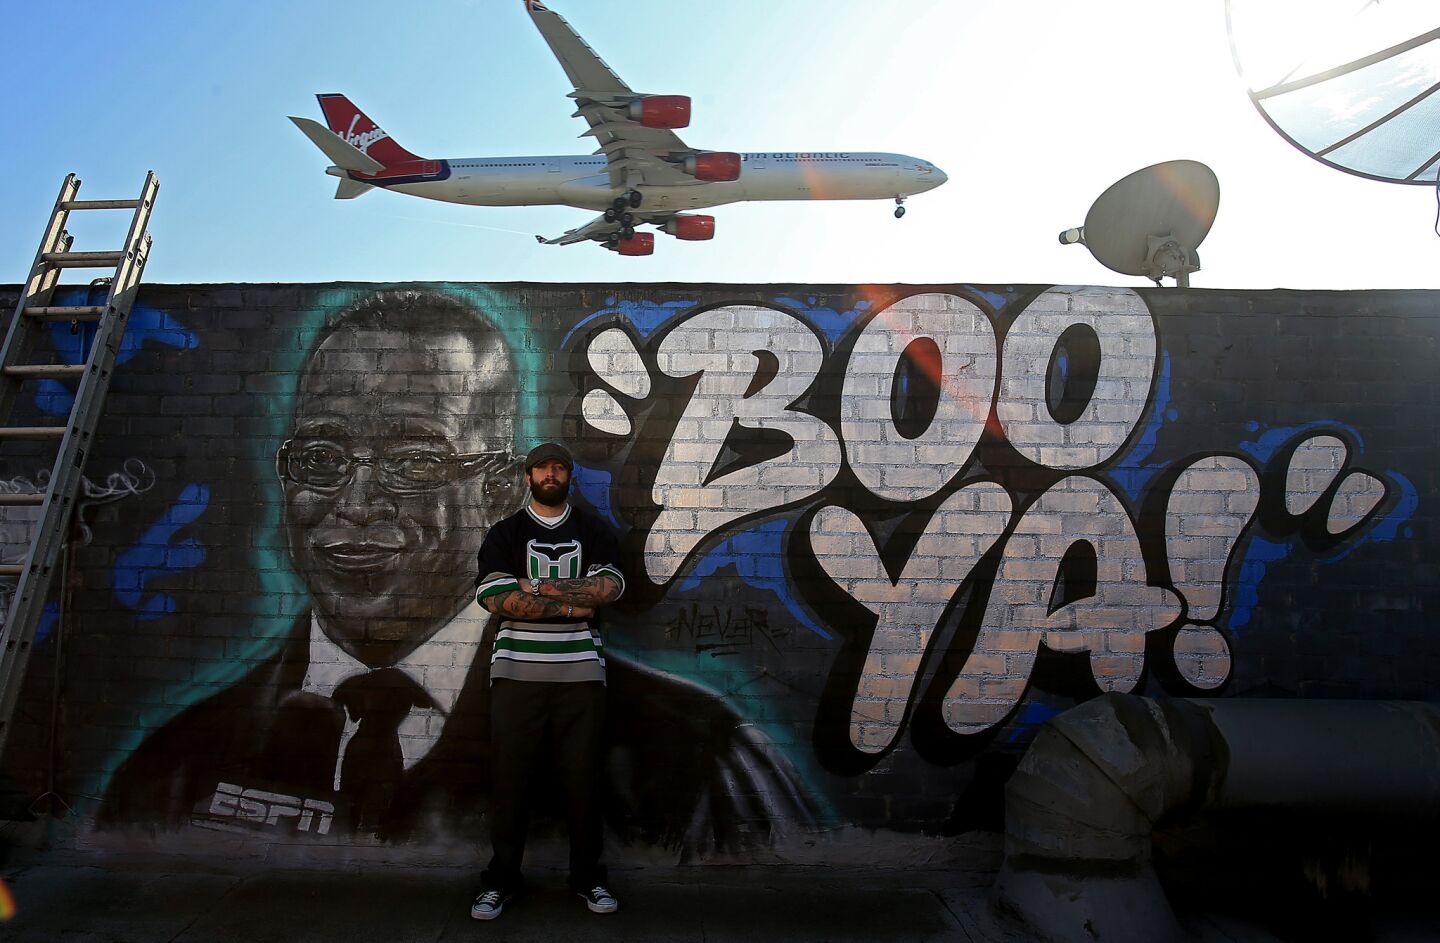 Artist Jonas Never painted a mural in honor of late ESPN sportscaster Stuart Scott on the rooftop wall of the Melody Bar & Grill near the flight path to LAX in Westchester.